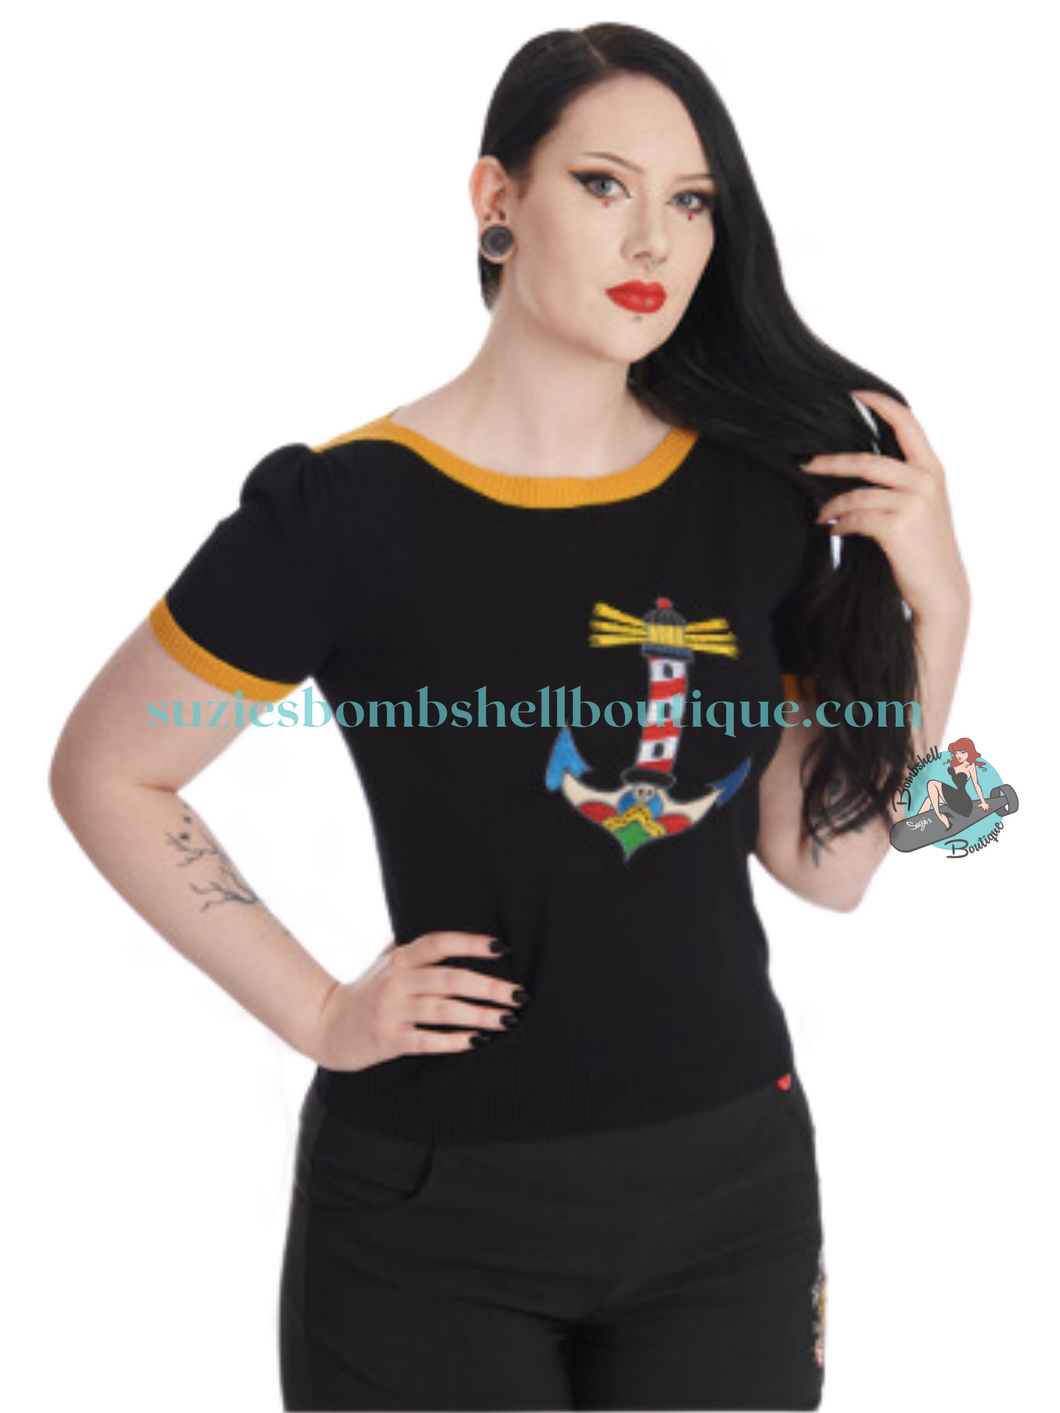 Banned Retro Sailing Sweetheart Sweater Banned Canada short sleeved black jumper top with anchor design pinup rockabilly retro vintage altfashion 50s 40s shirt Canadian Pin-Up Shop Suzie's Bombshell Boutique Port Dover